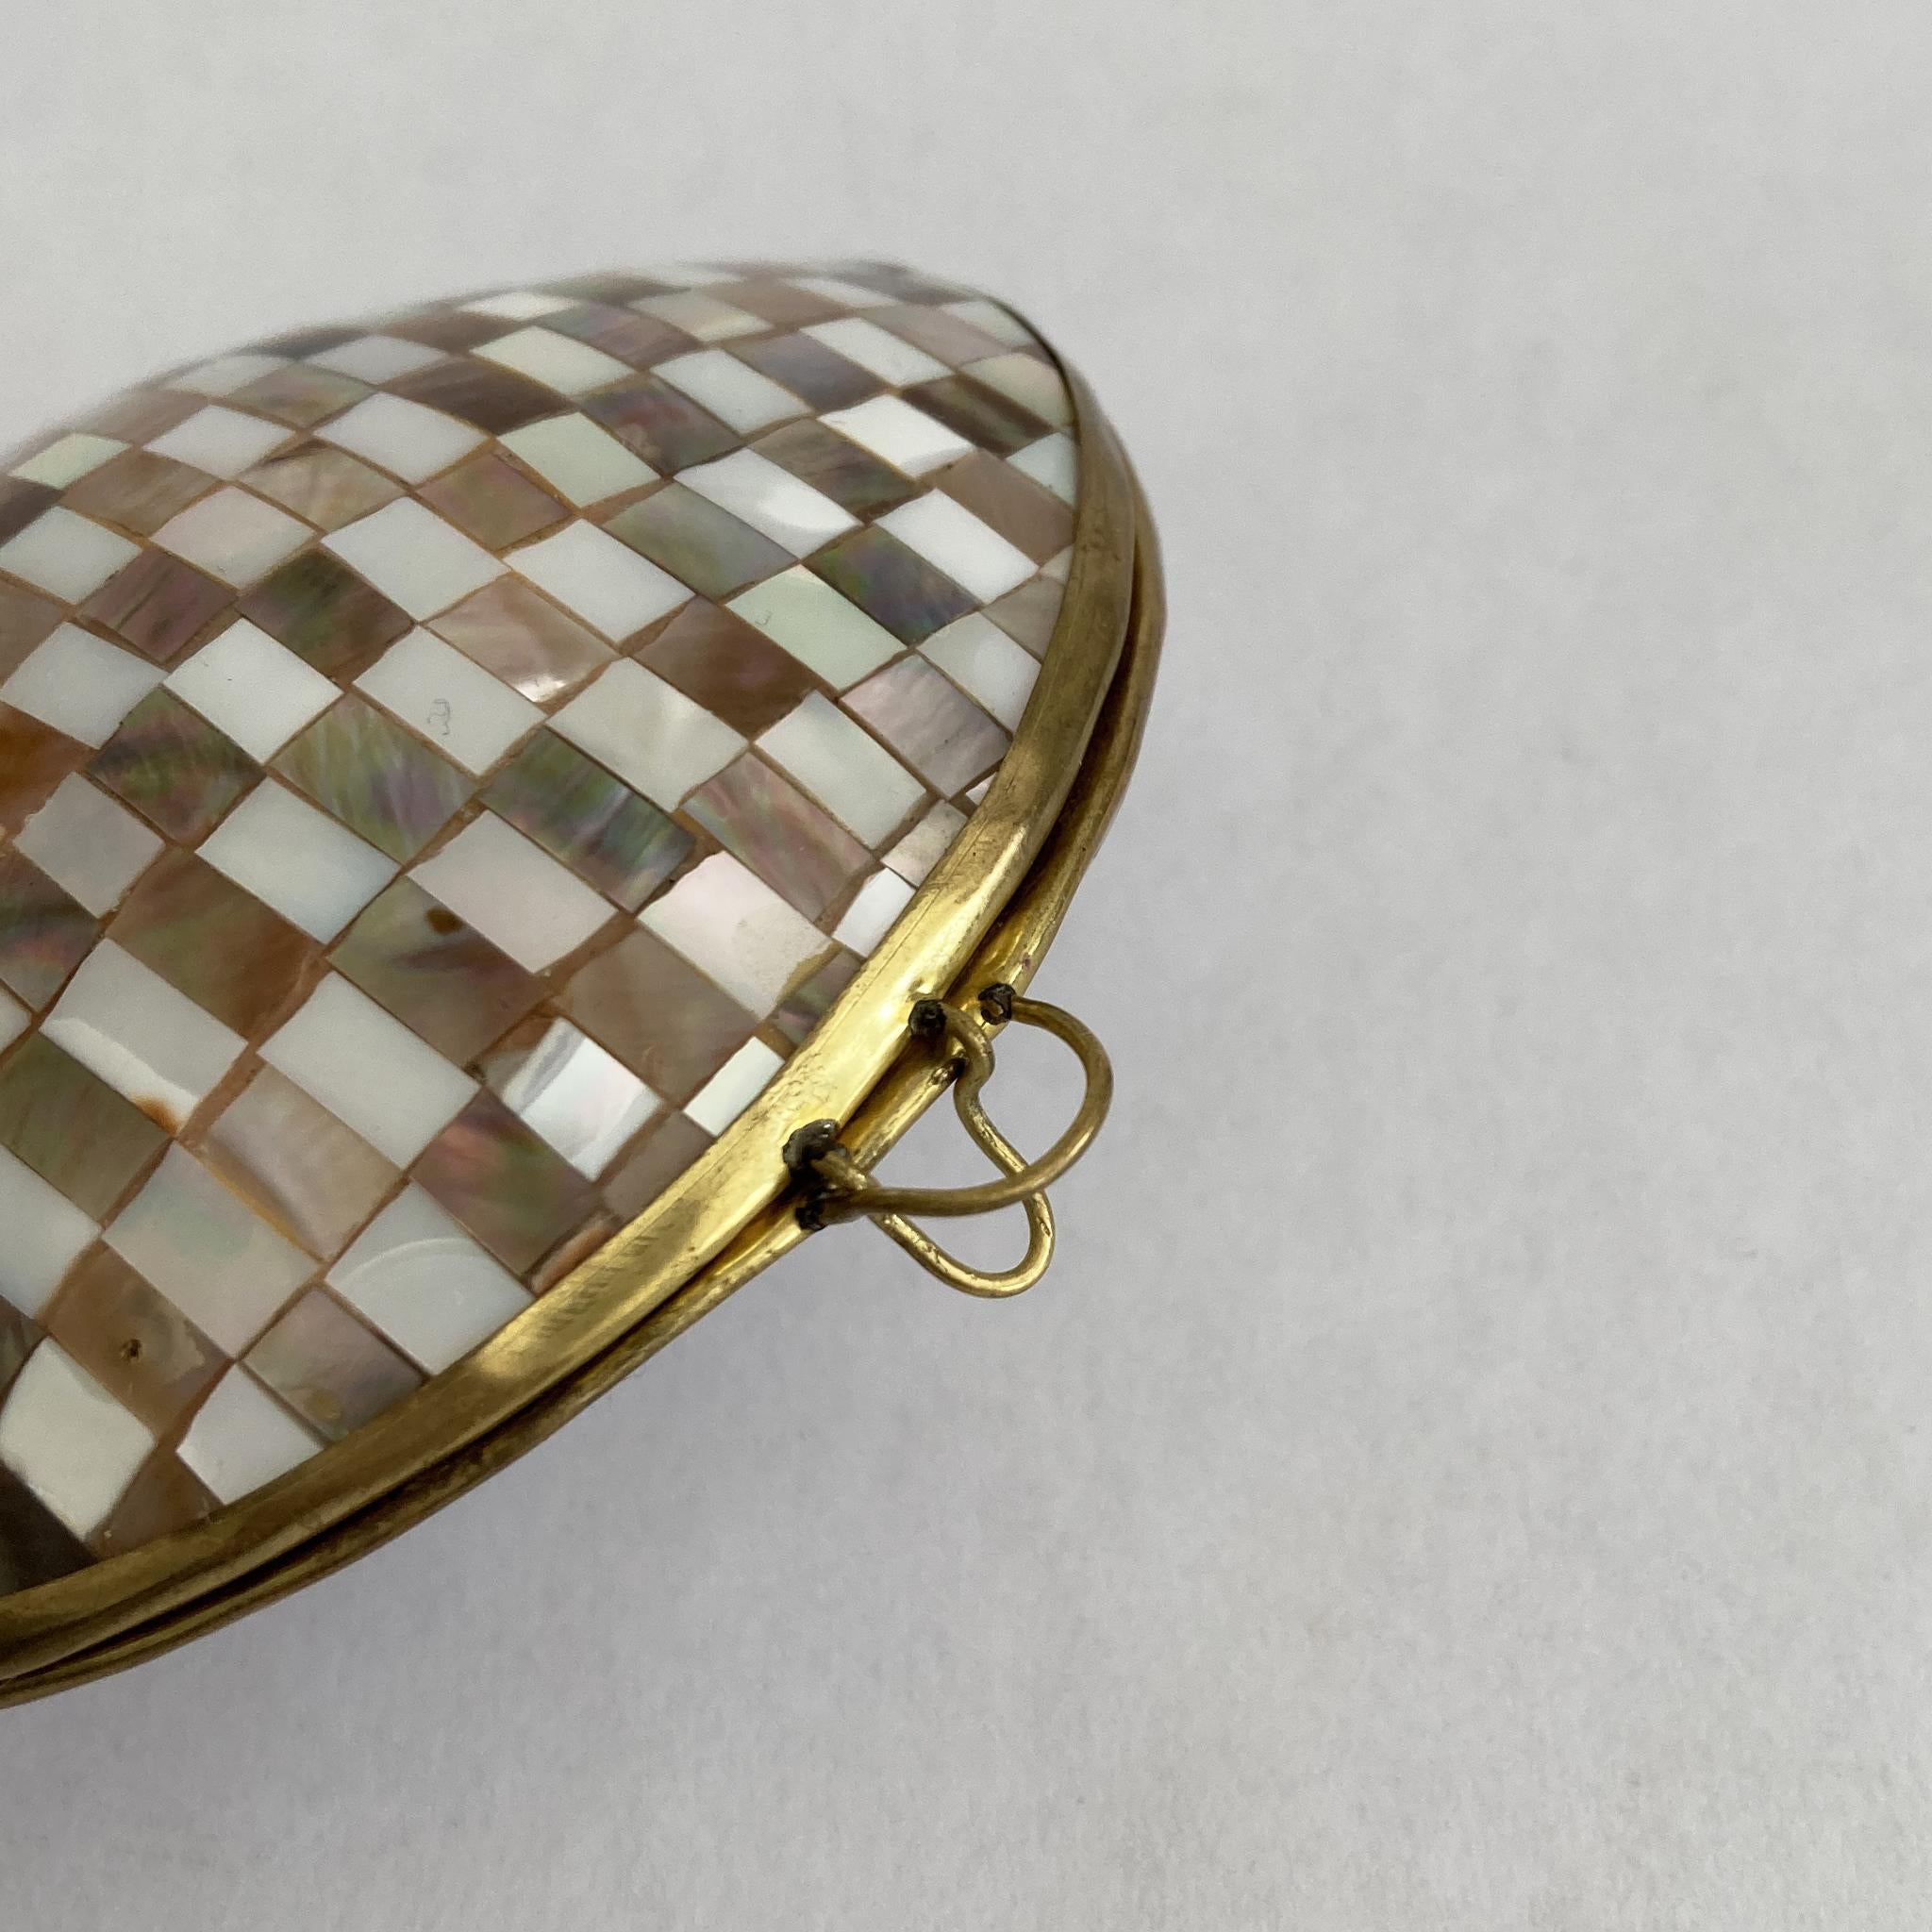 Vintage Hinged Seashell Box, in Checkerboard Mother of Pearl Mosaic, Brass Trim 1